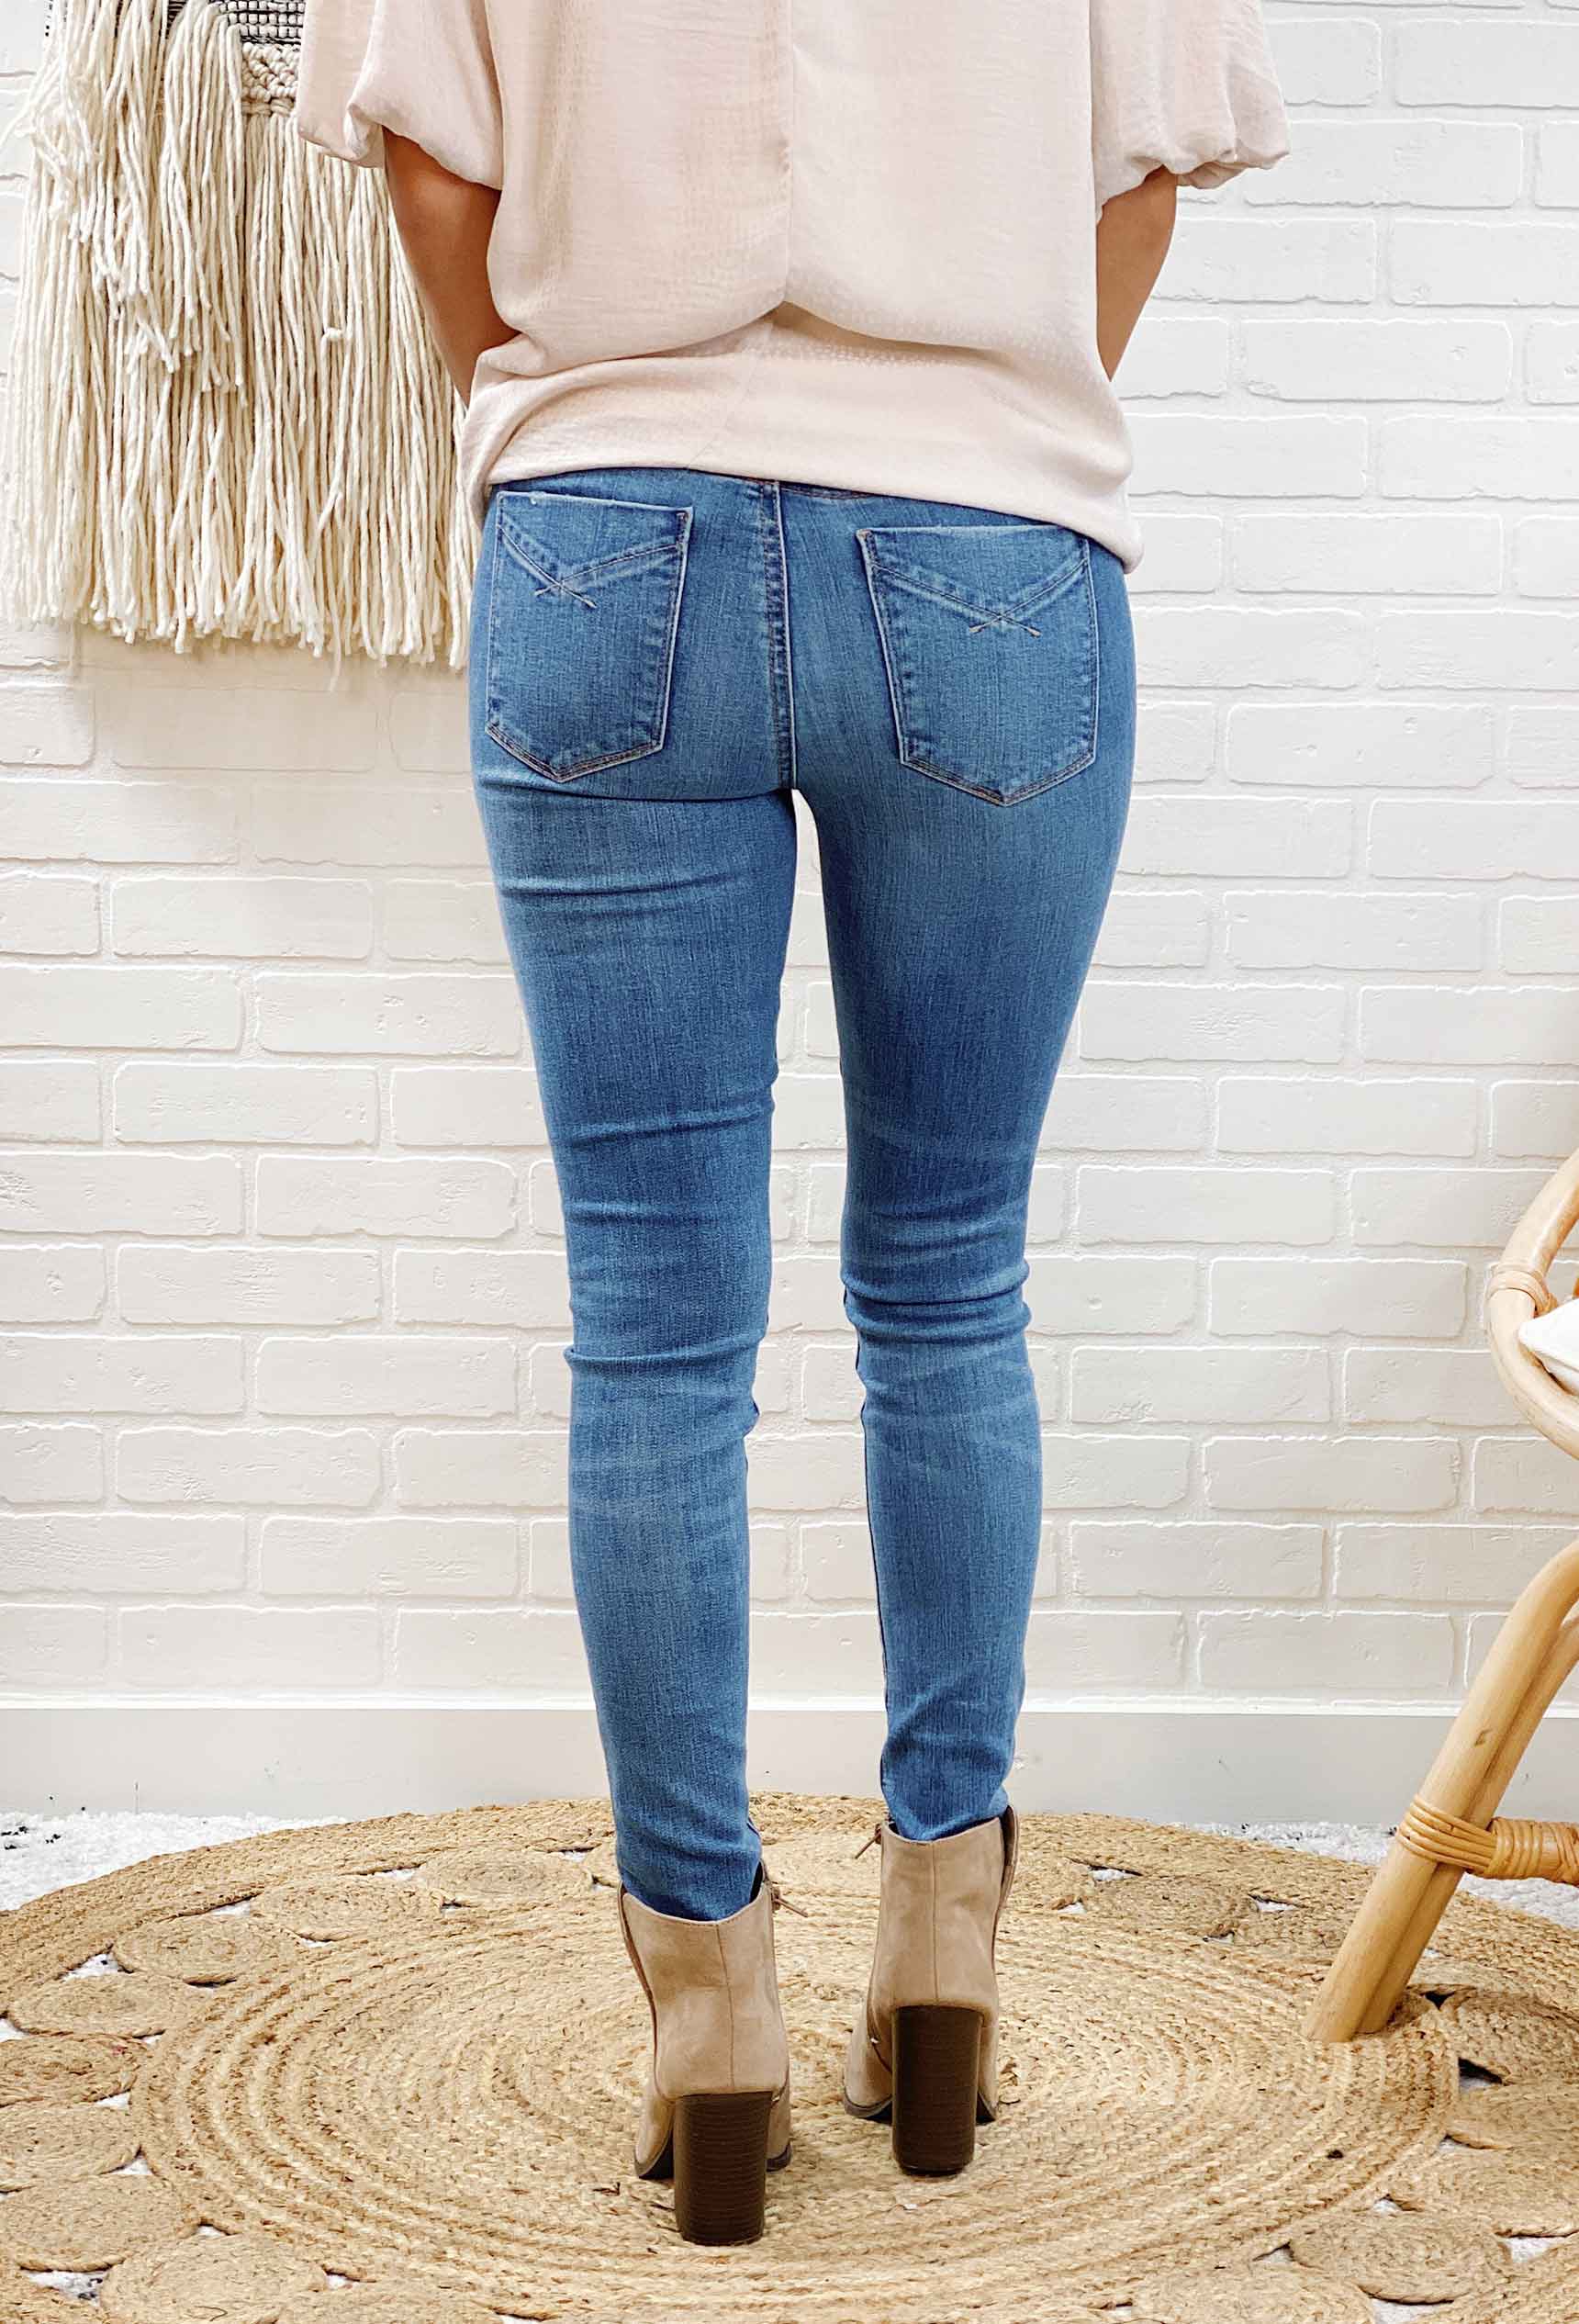 Unpublished High Rise Skinny Jeans, High Rise Skinny Jeans, Light Wash Skinny Jeans